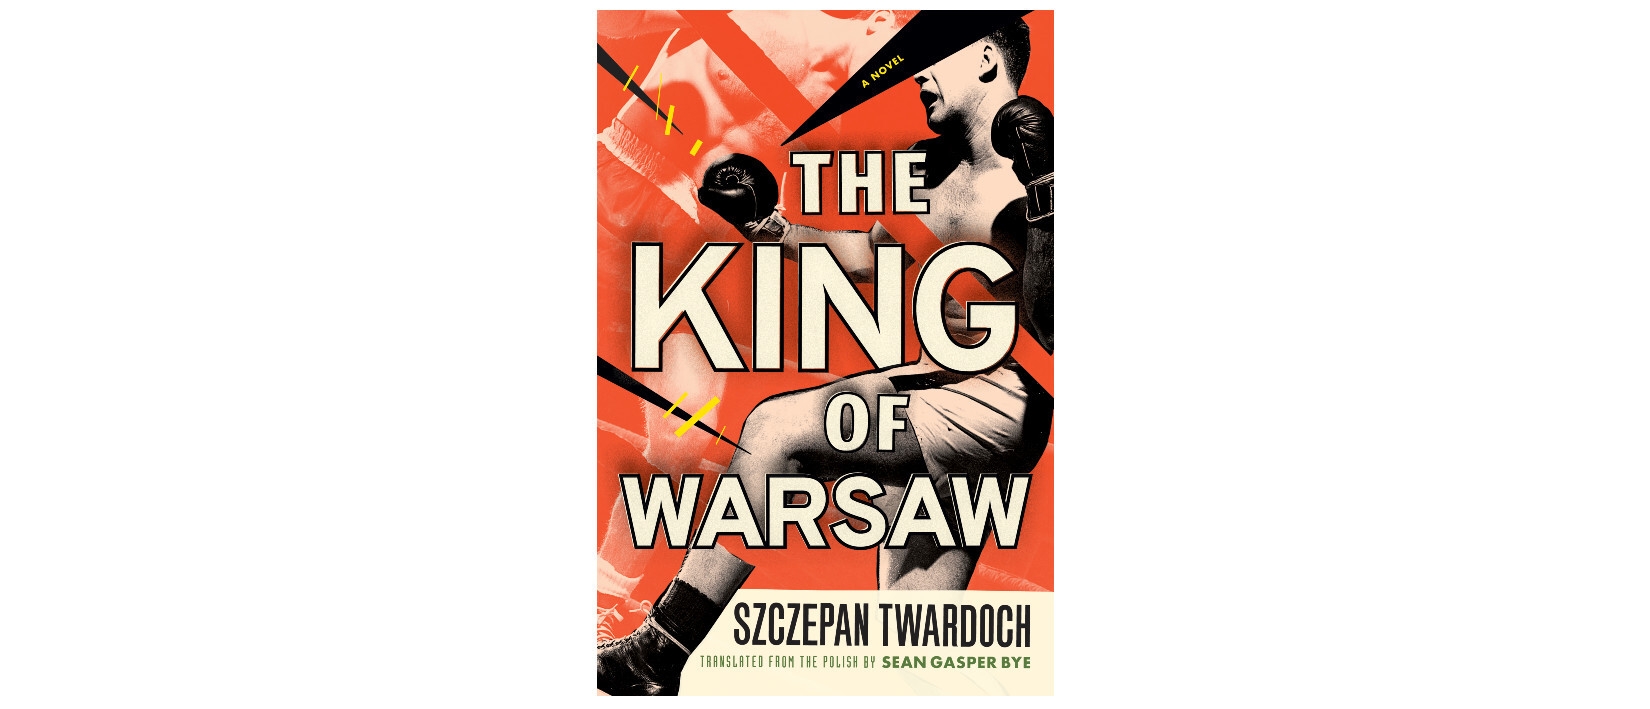 The book cover of "The King of Warsaw"  is a vintage orange color. The cover features a male boxer wearing shorts and boxing gloves punching his opponent whose image is faded.